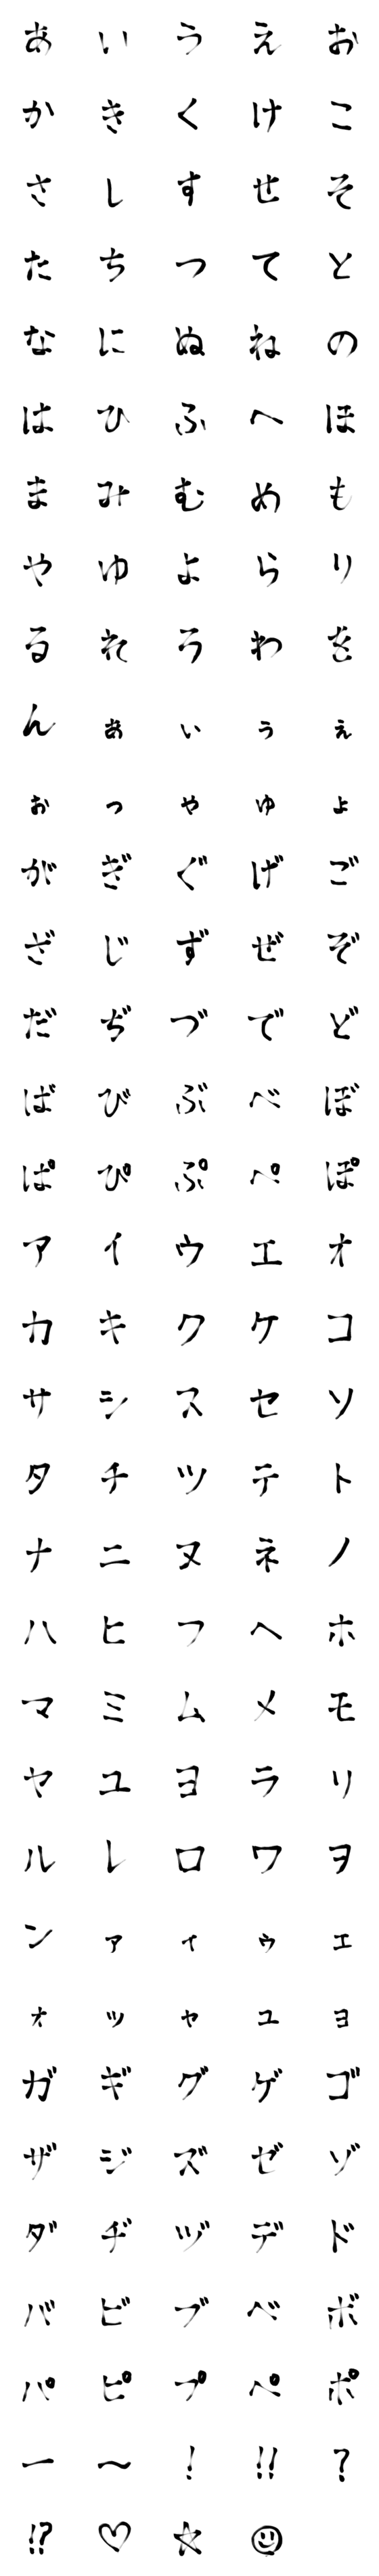 [LINE絵文字]俺の字の画像一覧